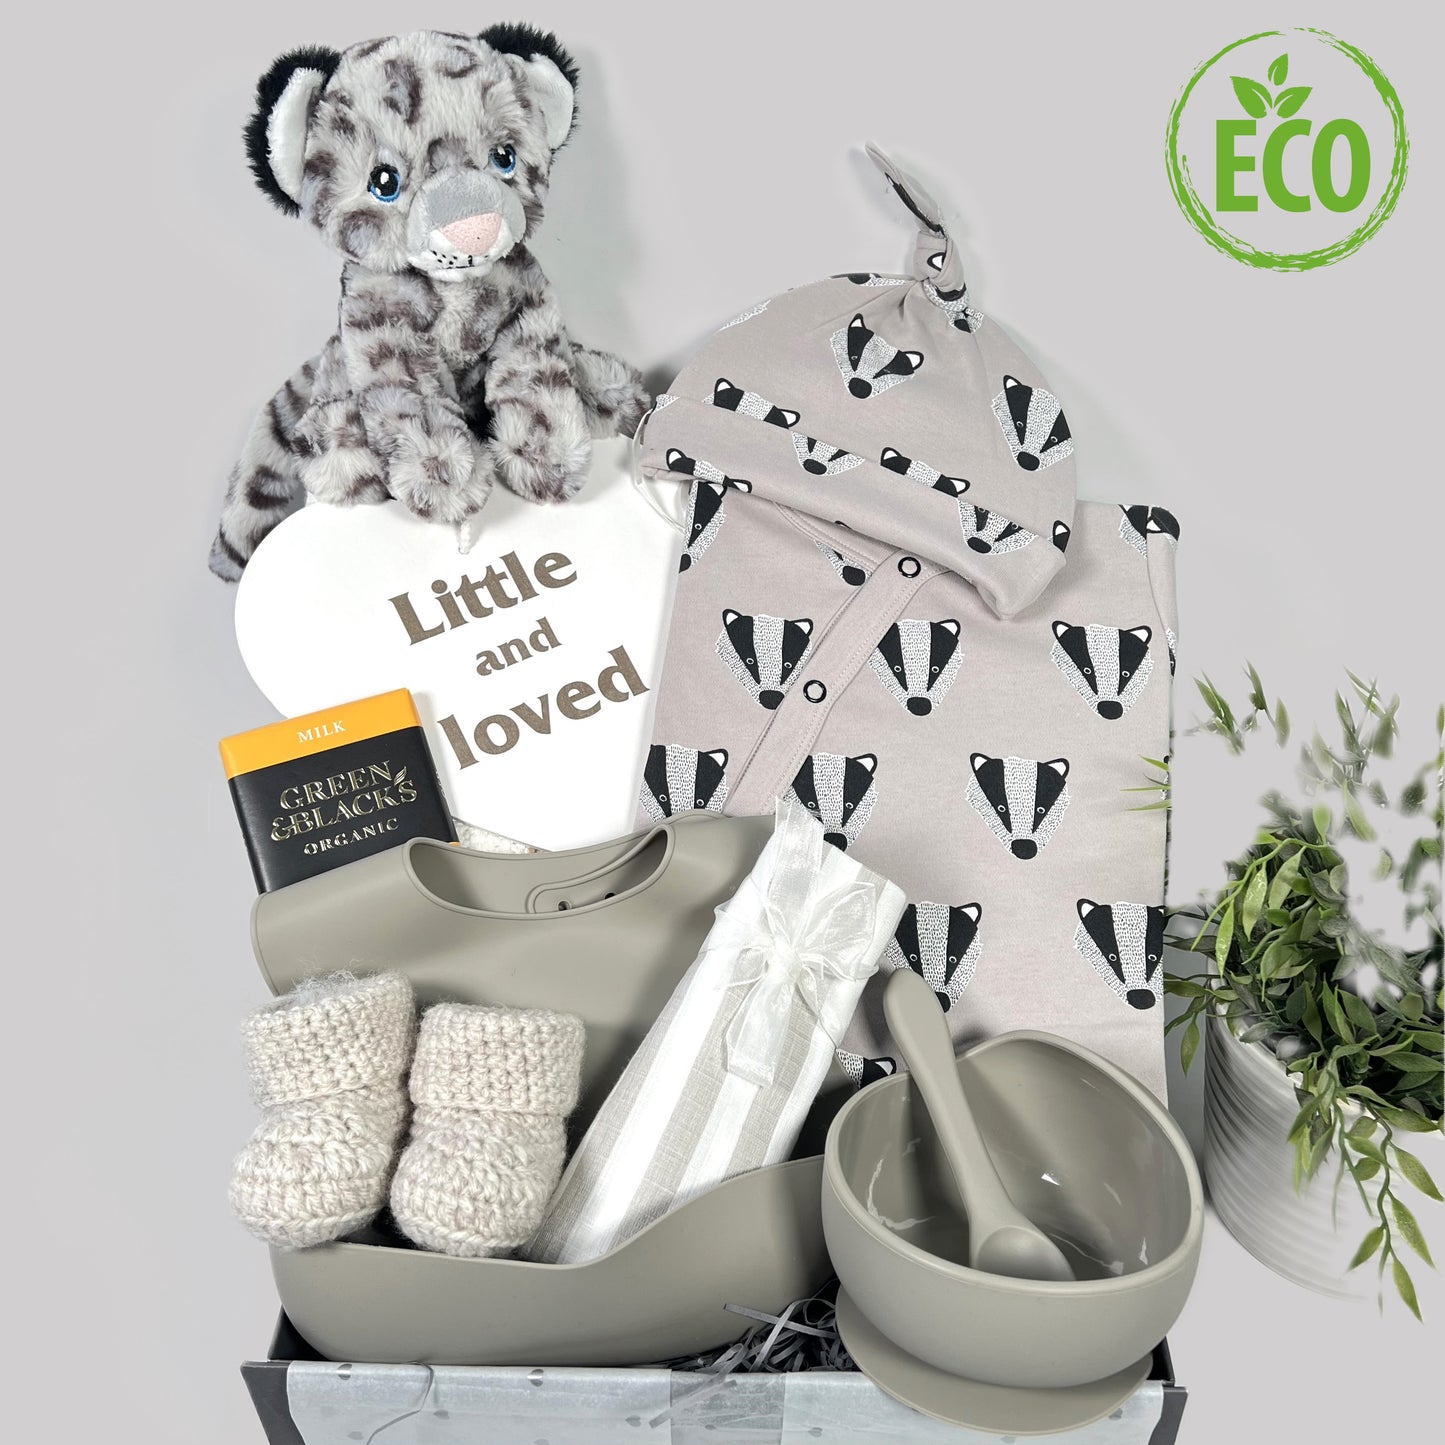 A luxury unisex new baby gift containing a GOTS certified organic cotton baby romper and matching baby knot hat in a stone colour with a badger face print, a weaning set in silicone, a pair of crocheted baby booties, aaaaaaakeeleco snowleopard soft baby toy, a bar of Green and Blacks chocolate and a \Nursery sign reading "Little and loved".